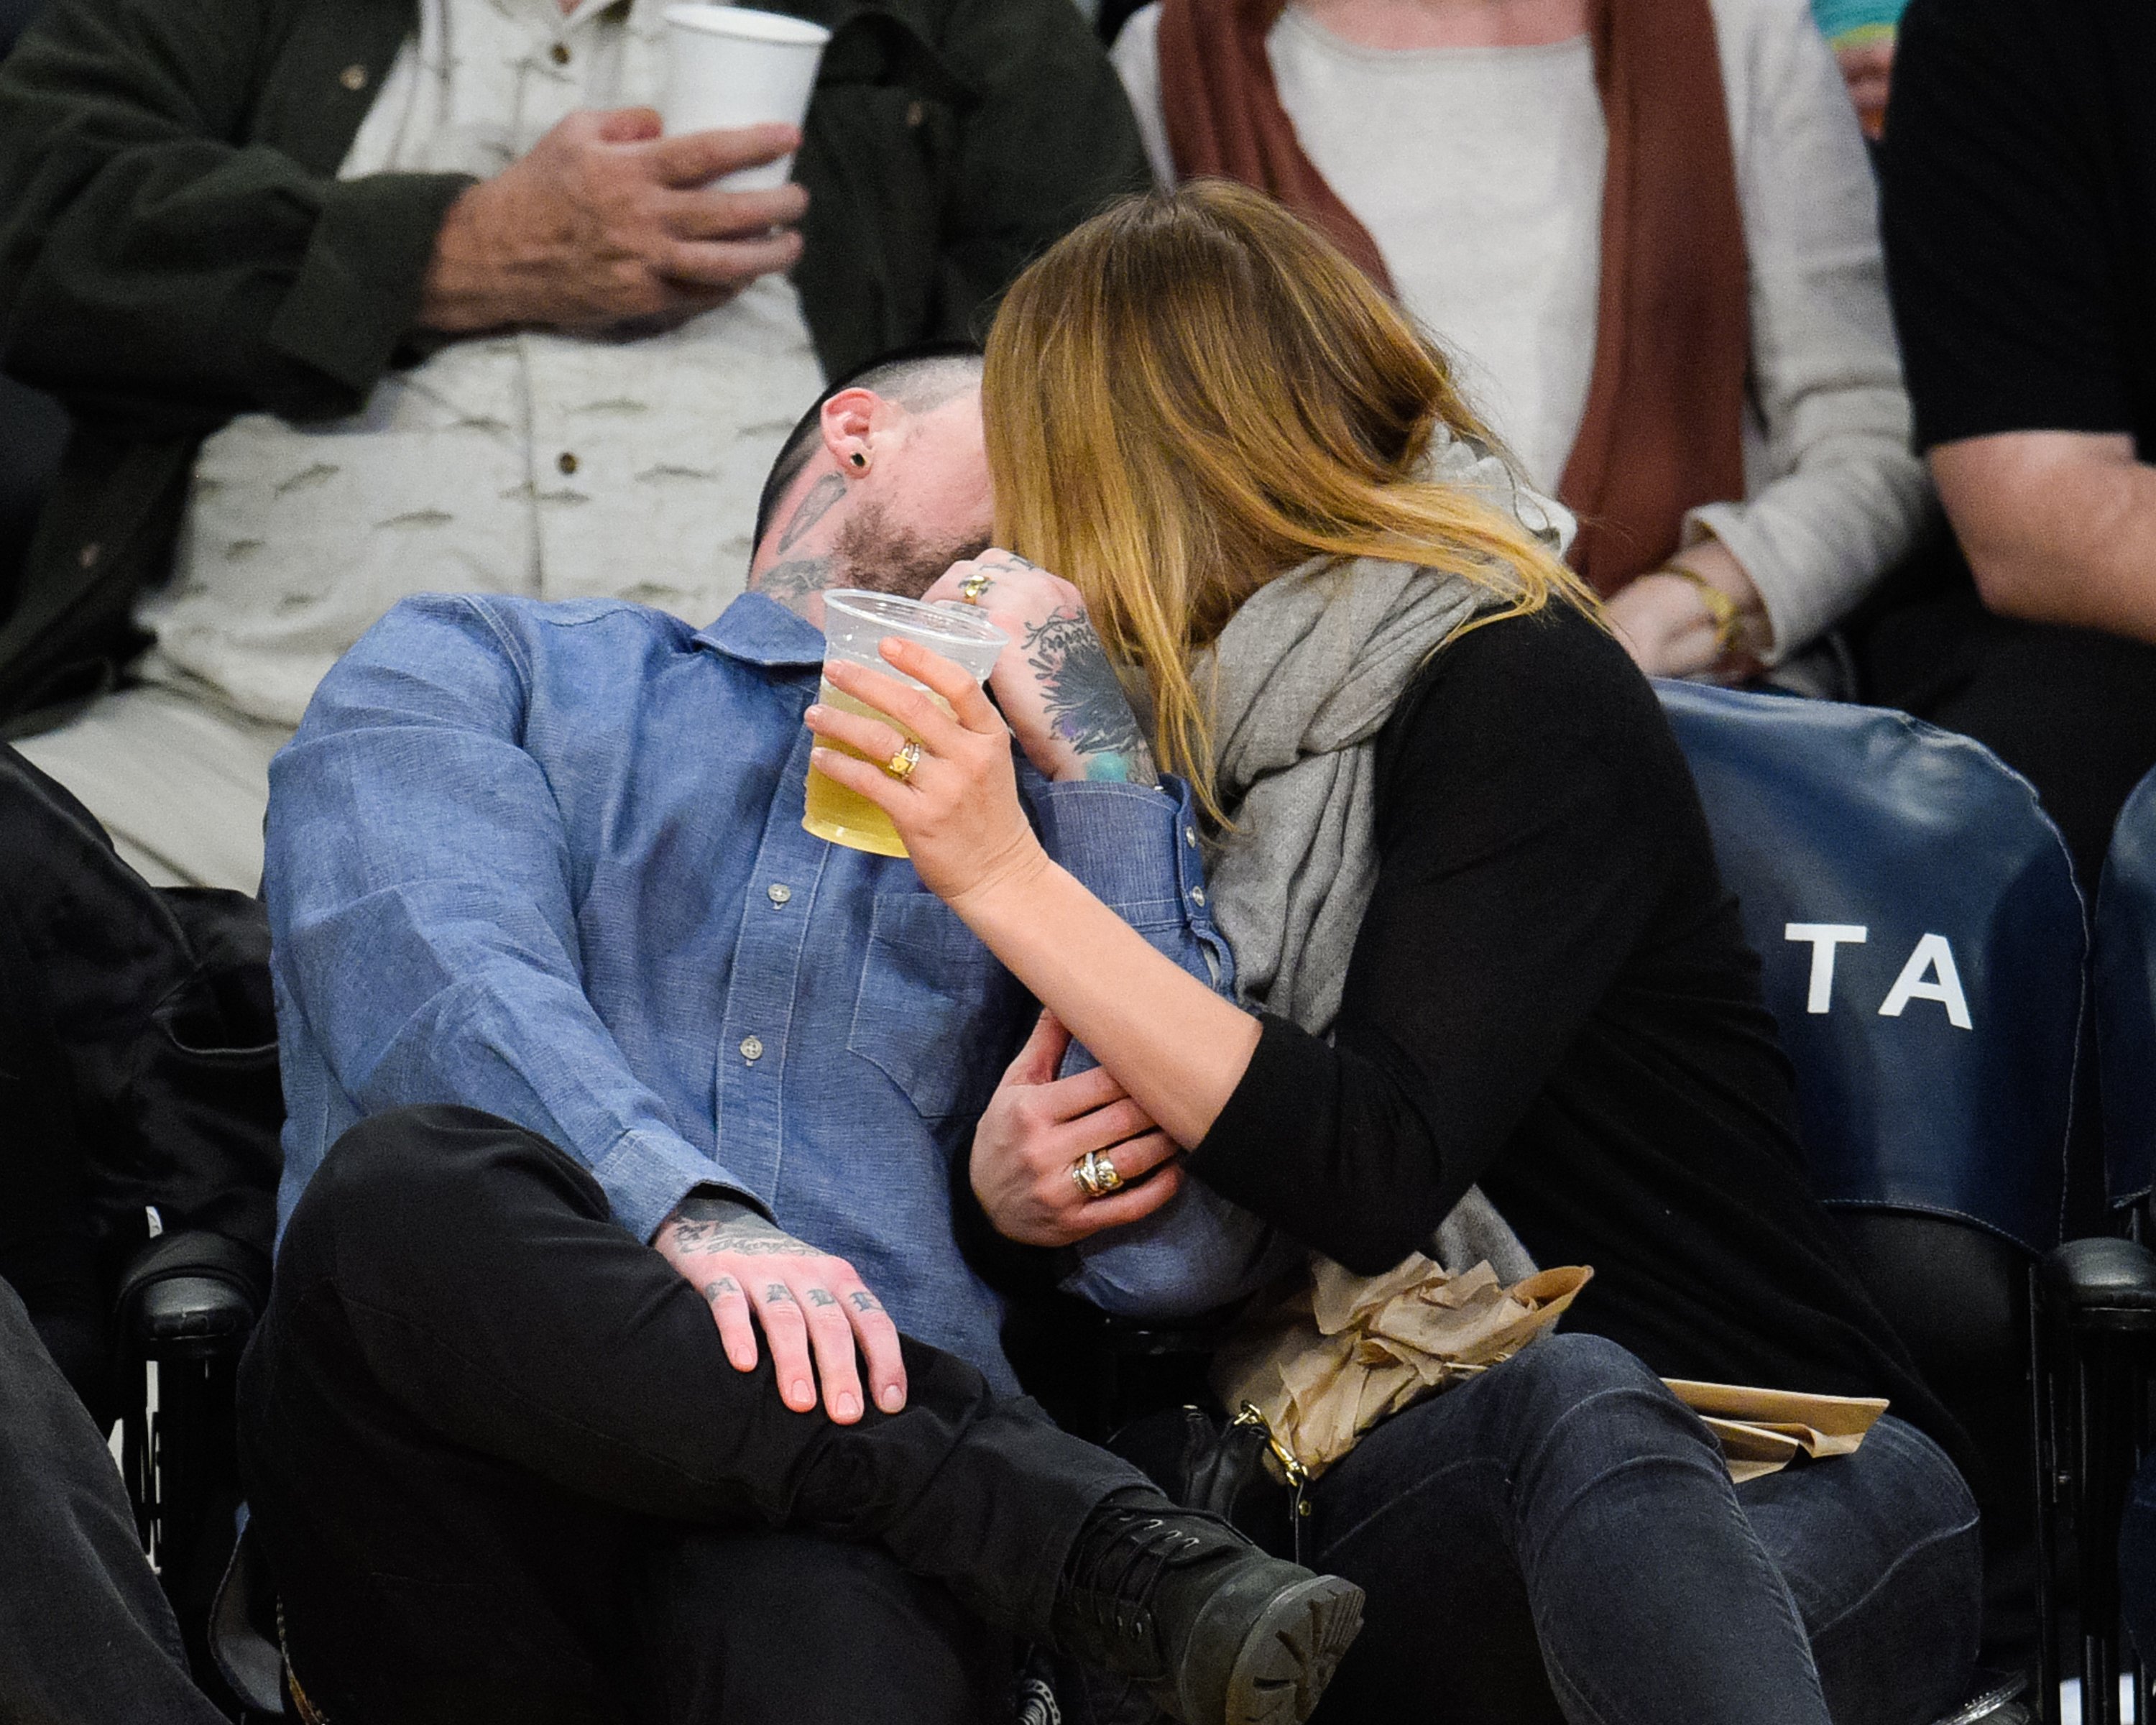  Benji Madden and Cameron Diaz kiss at a basketball game between the Washington Wizards and the Los Angeles Lakers at Staples Center on January 27, 2015 | Source: Getty Images